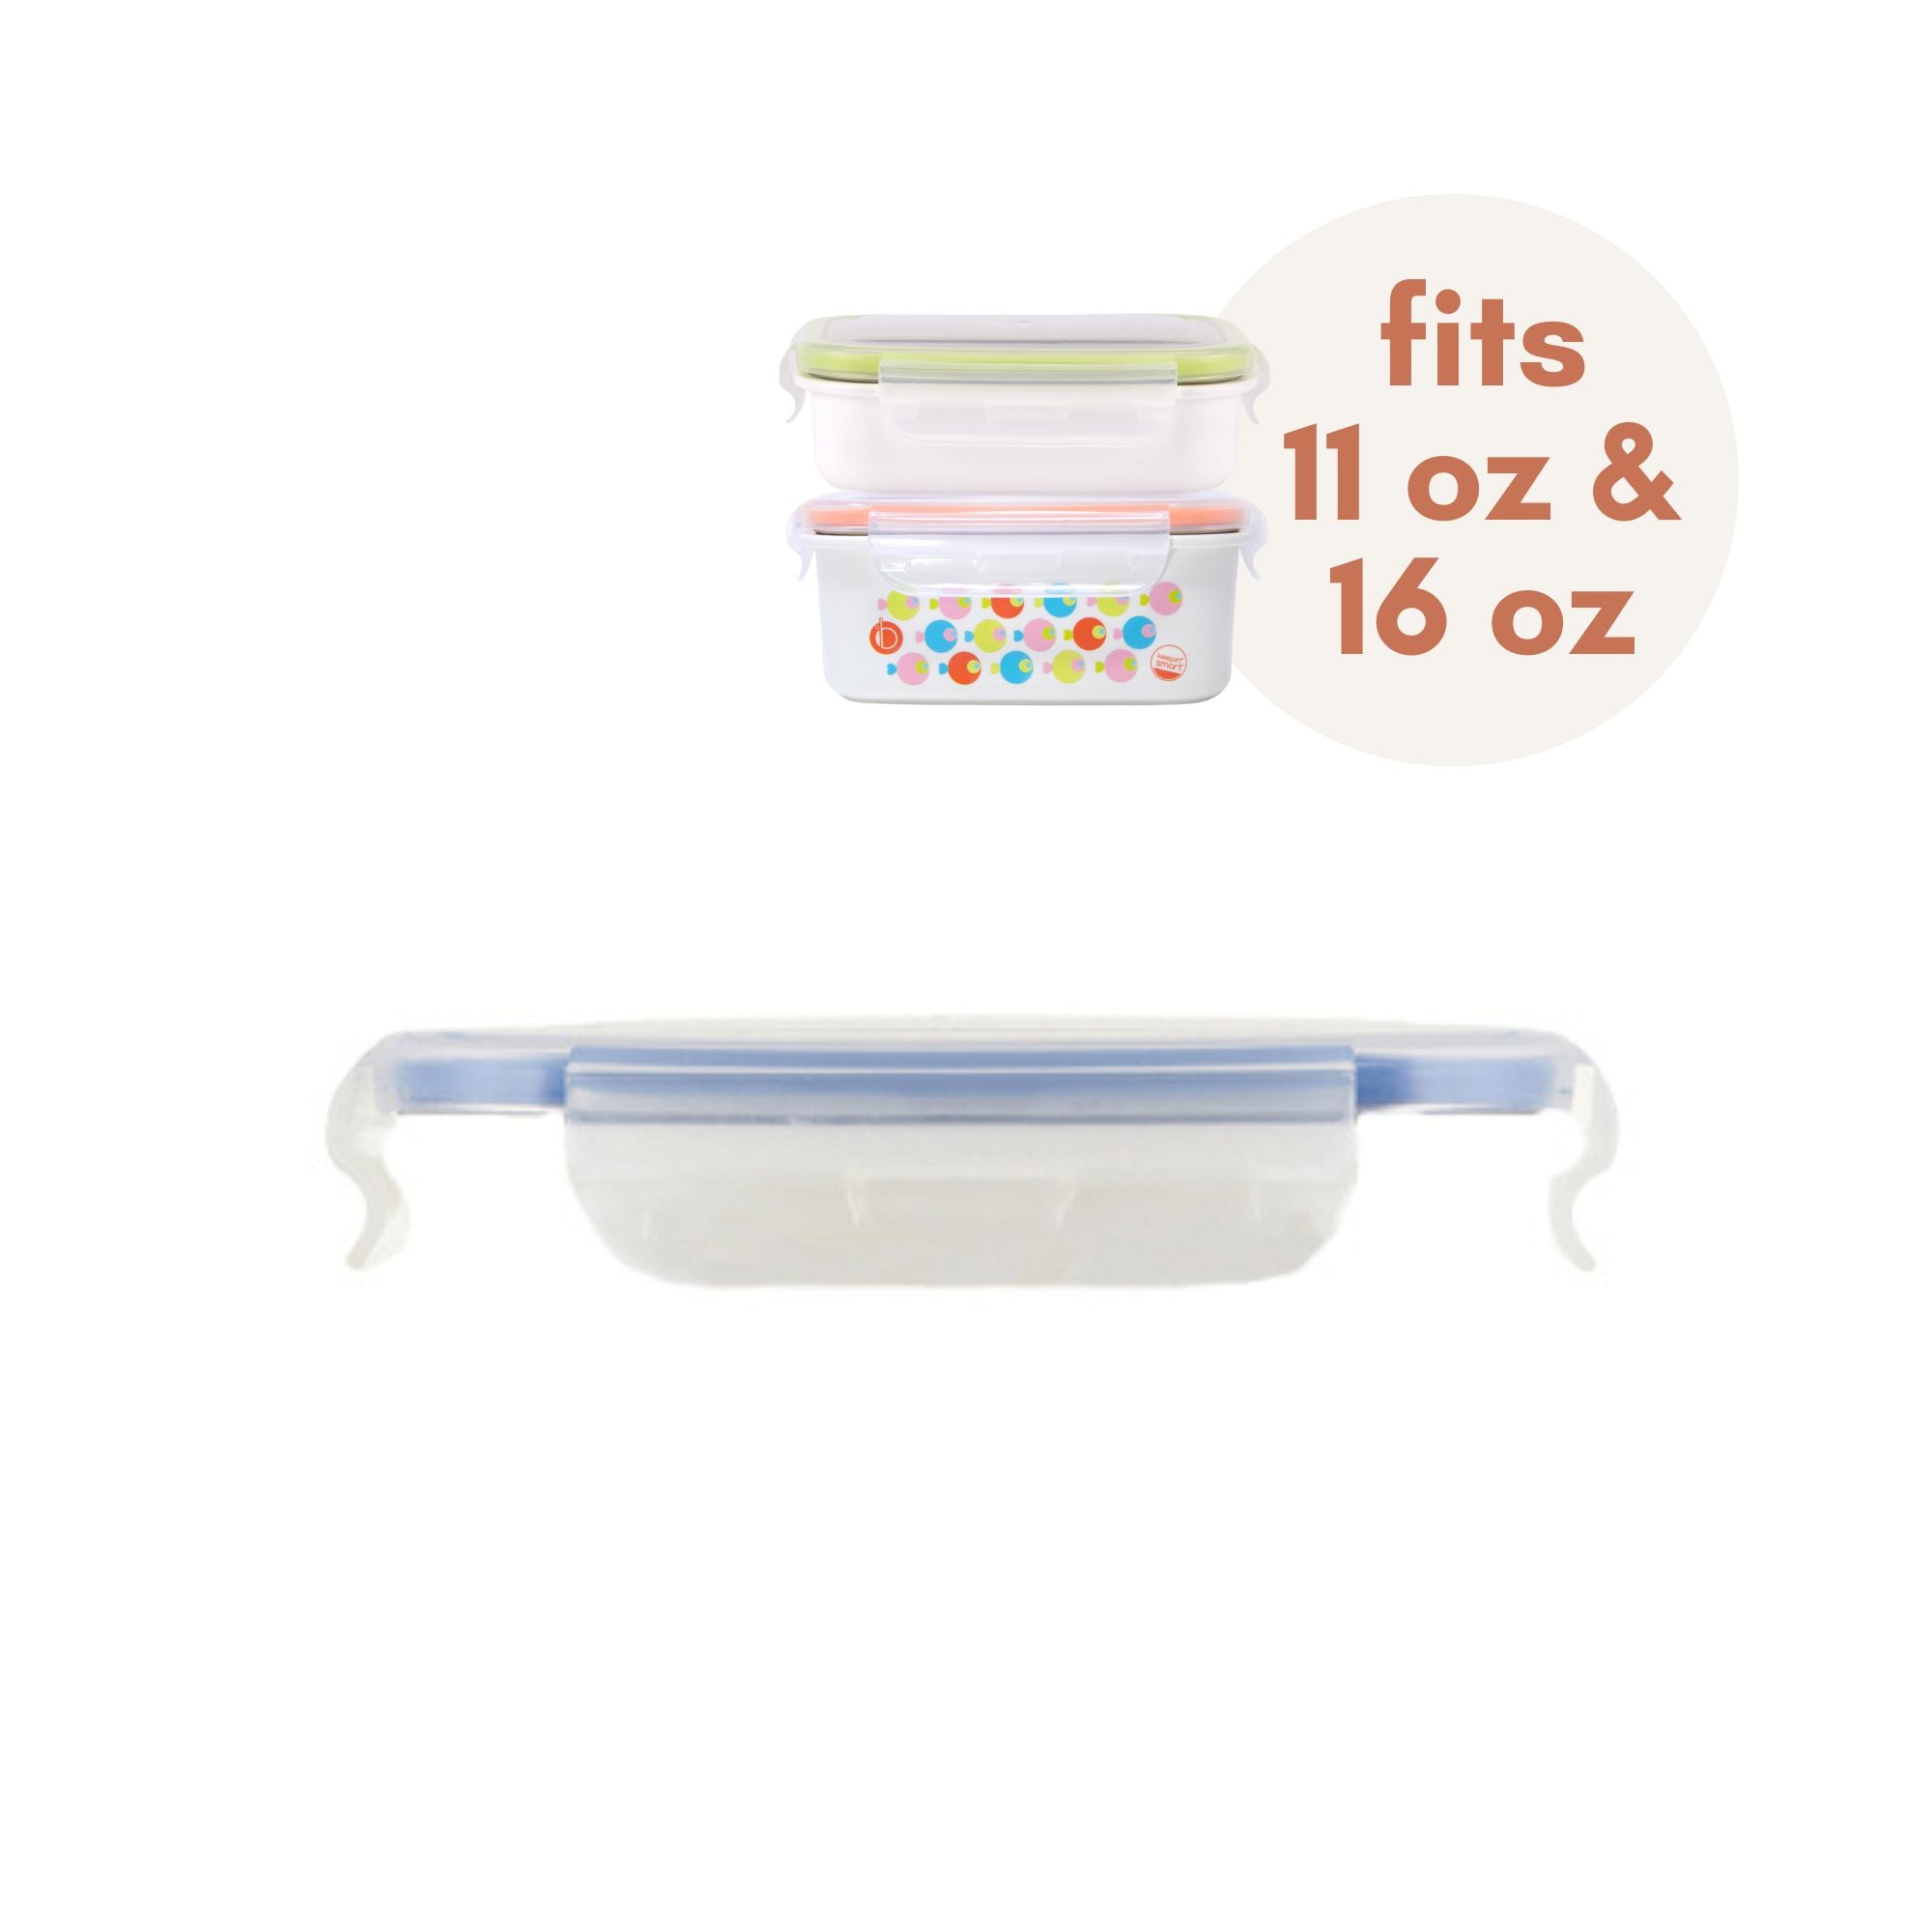 Innobaby Keepin' SMART Double Lined Stainless Lunchbox - 15 oz - Fish